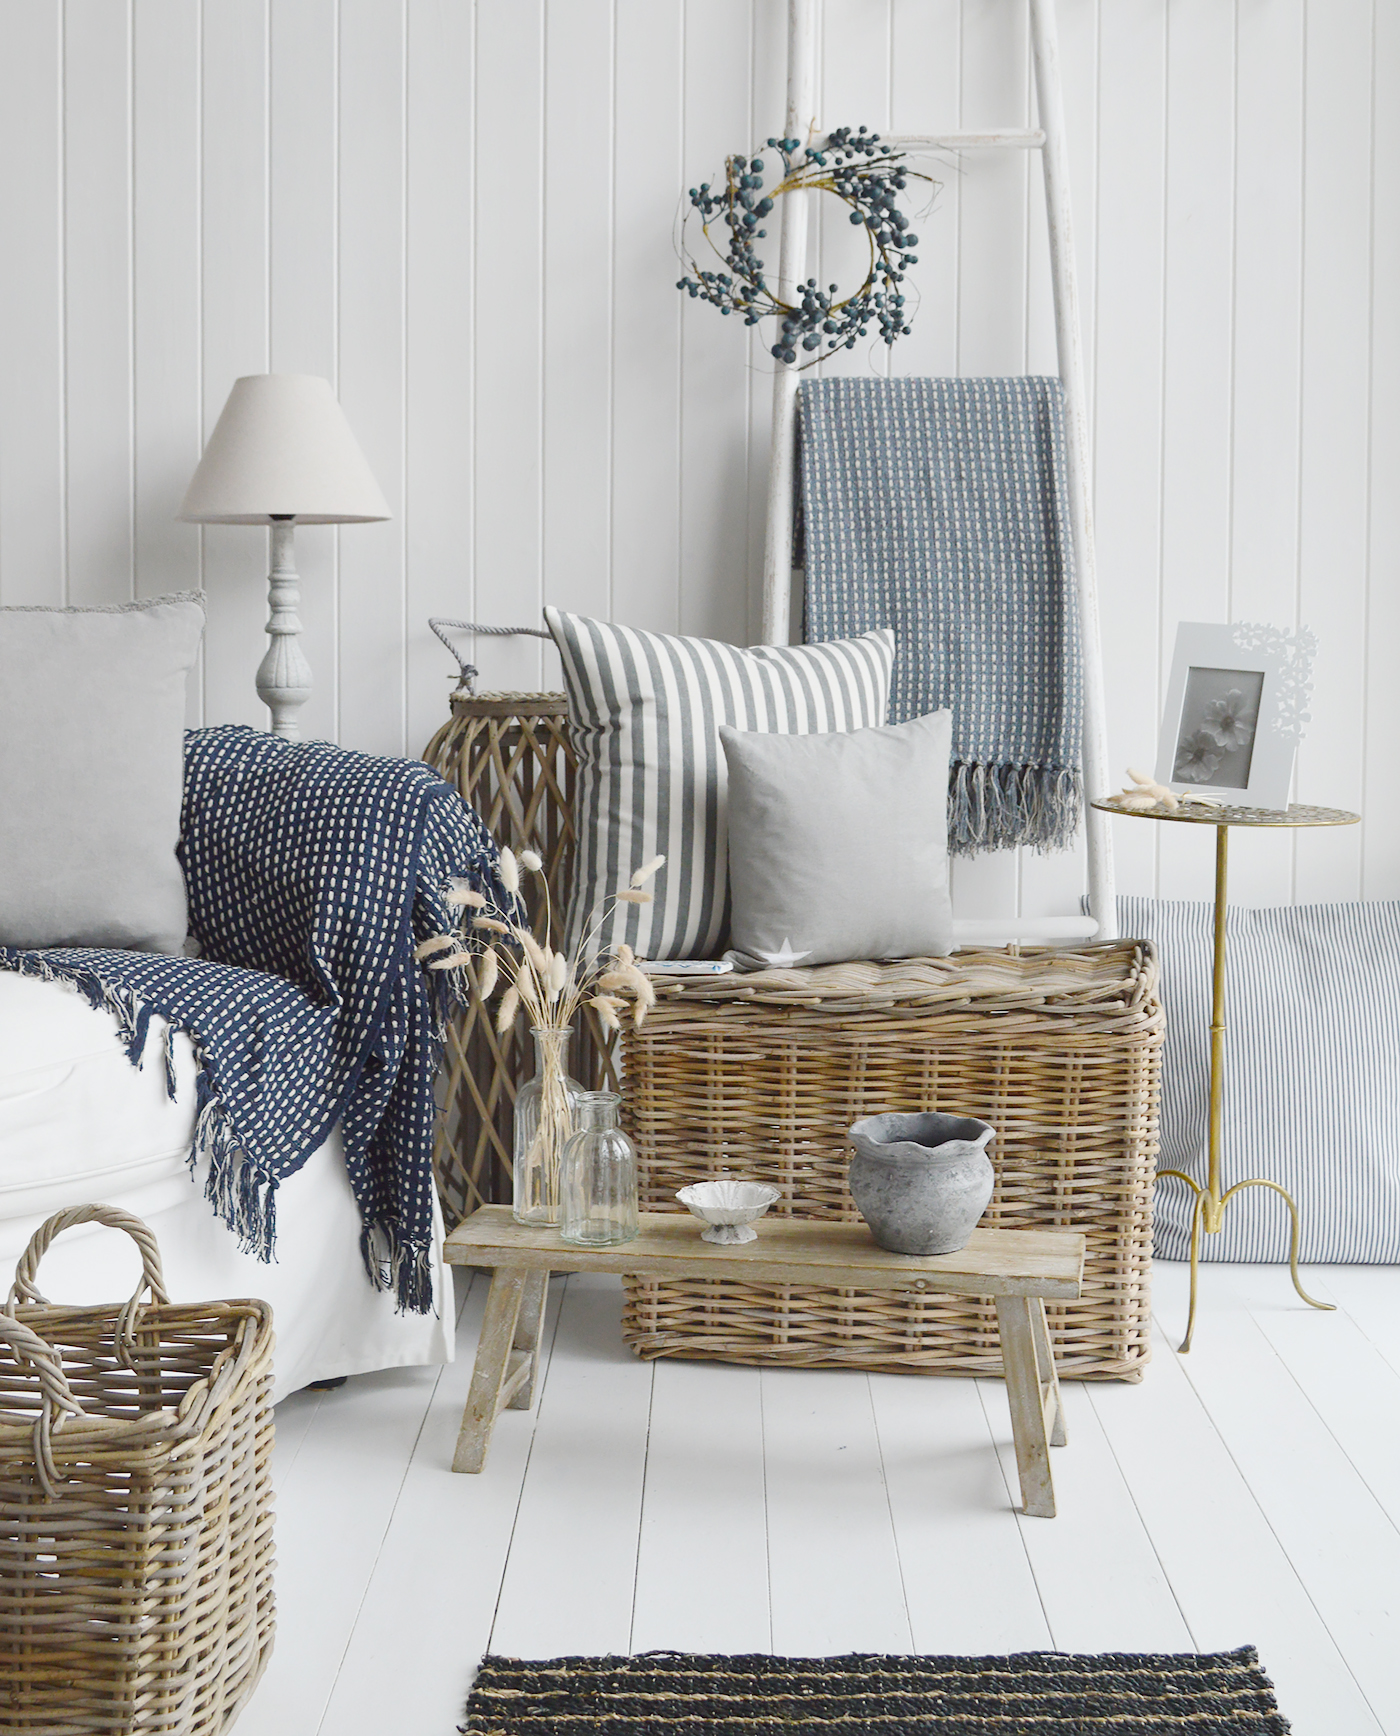 New England Country and coastal furniture. Beach House and Modern Farmhouse style interiors from The White Lighthouse